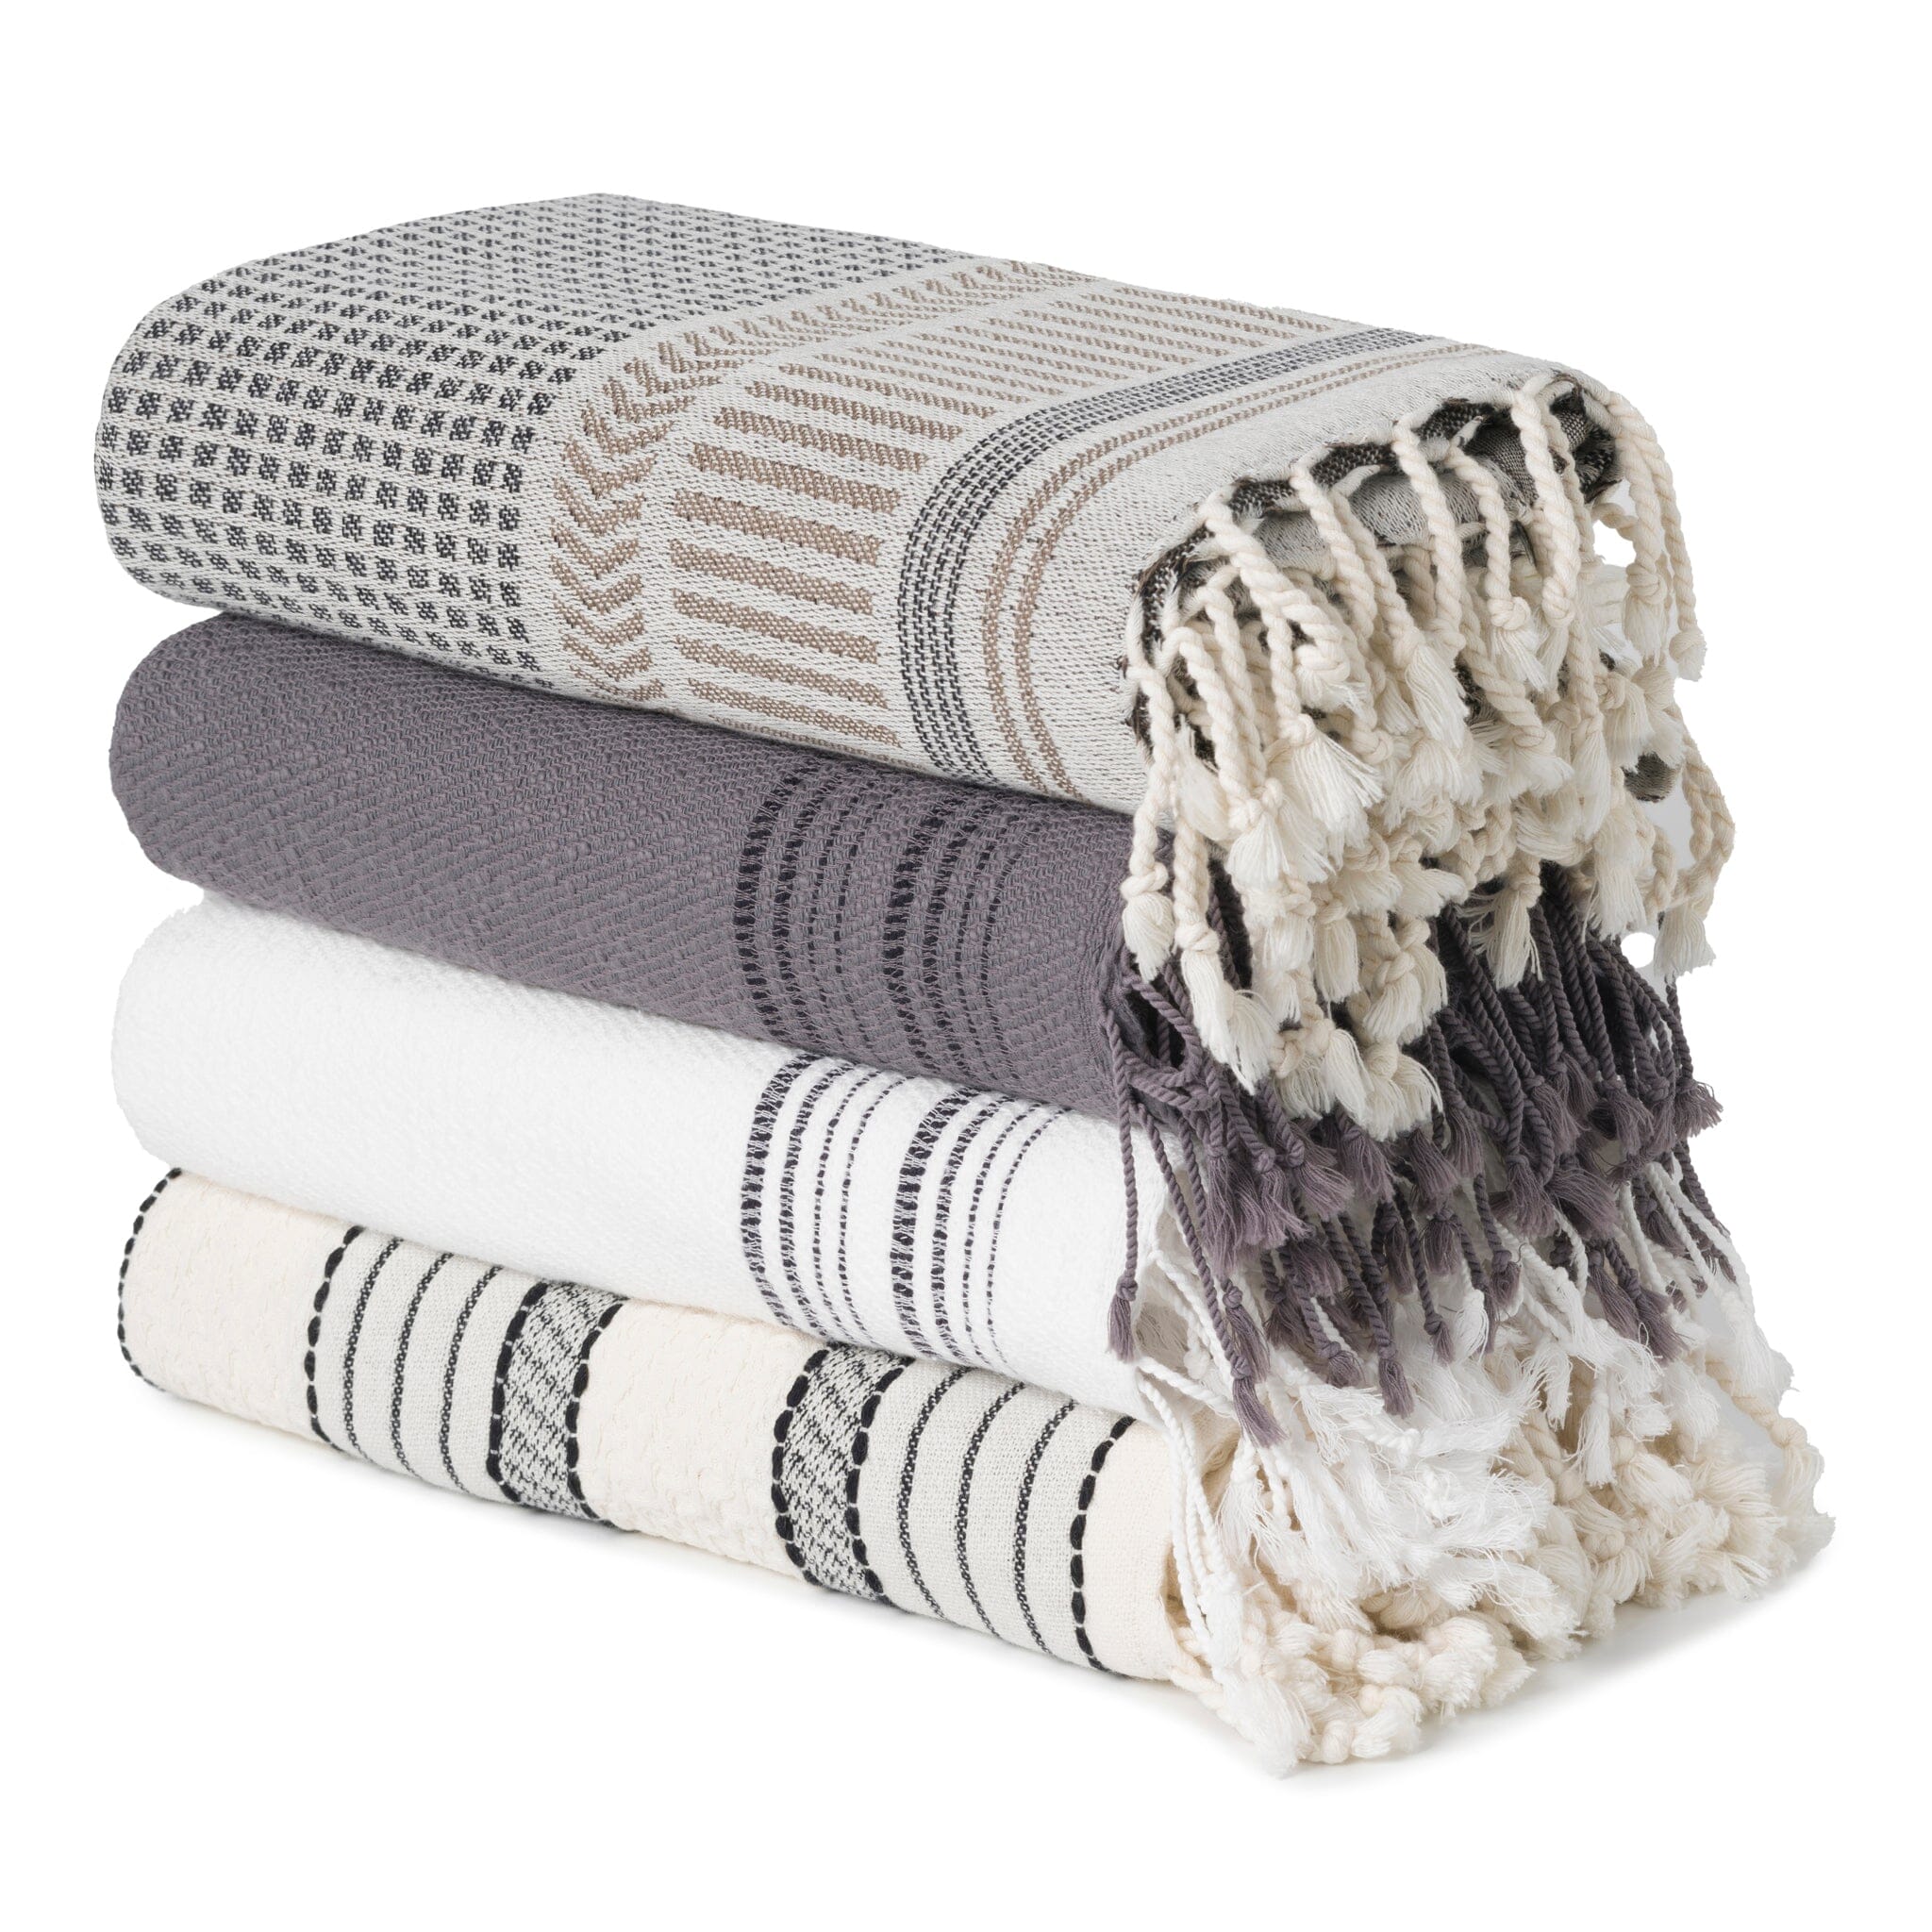 These Bestselling Turkish Beach Towels Are Over 60% Off on